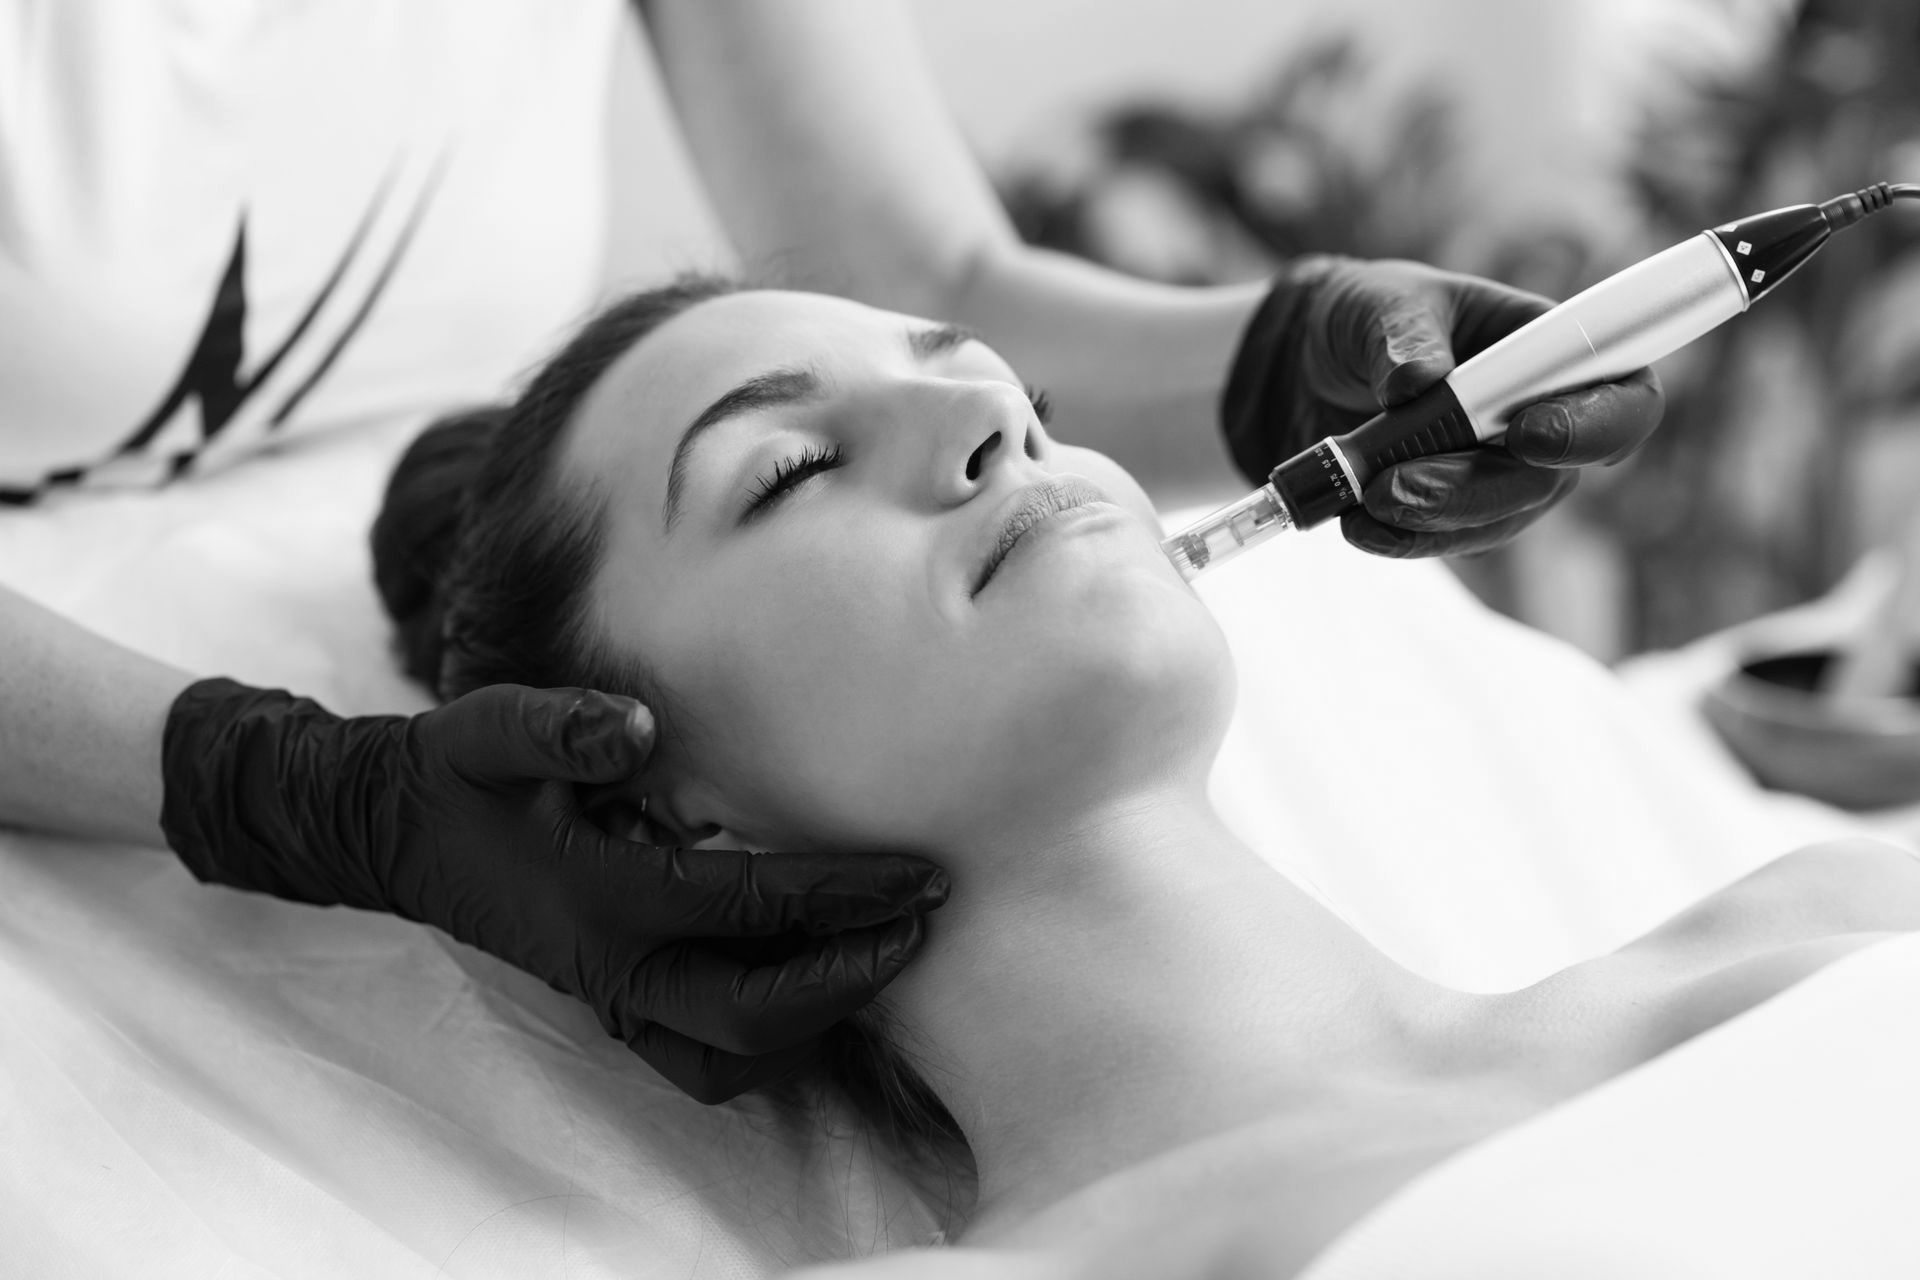 A woman is getting a facial treatment in a black and white photo.